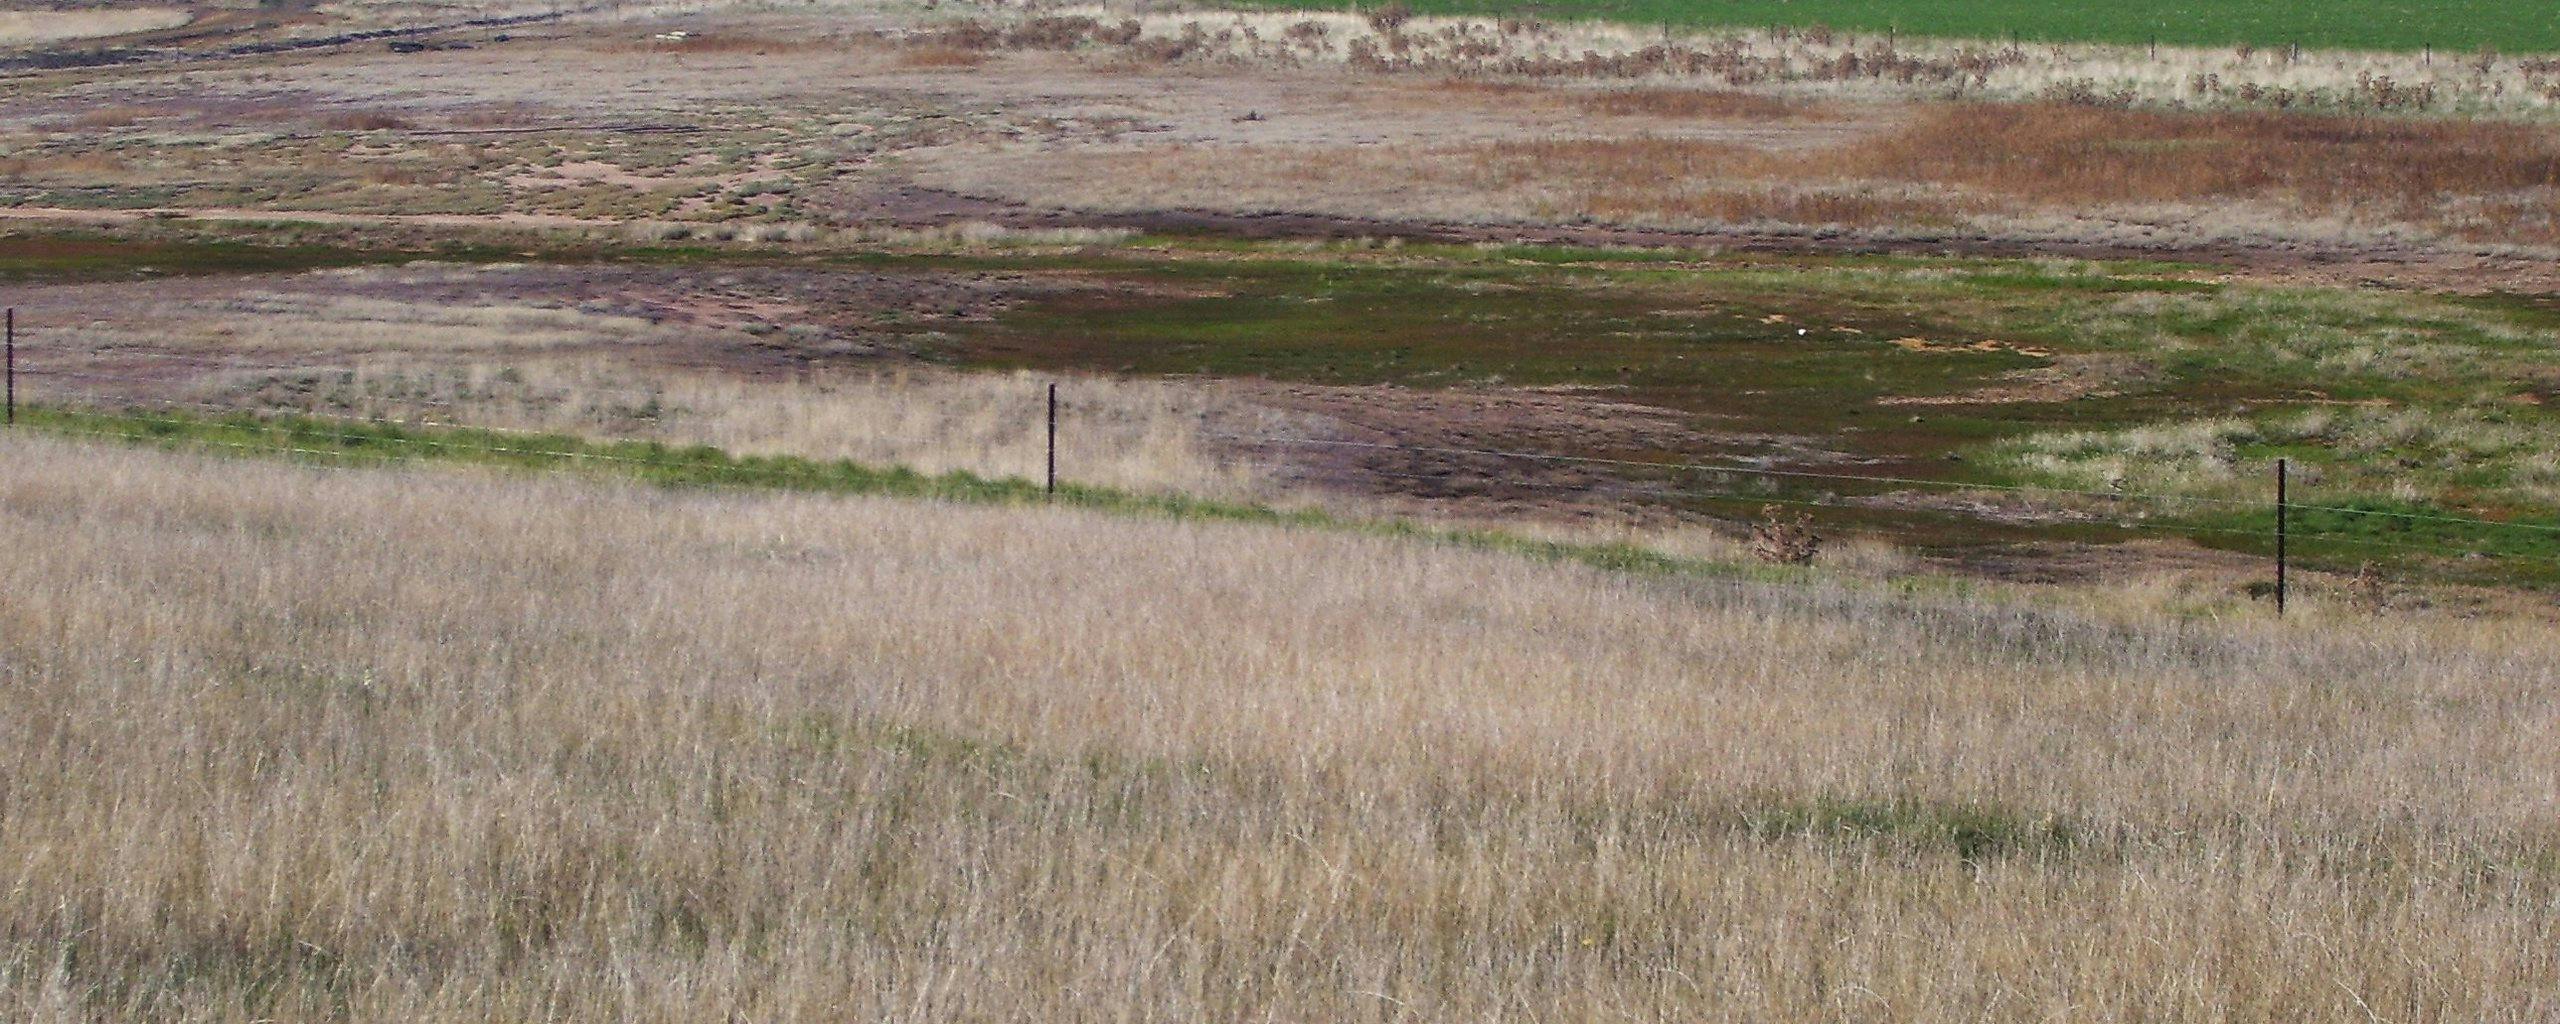 Figure 70. Saline seepage and scalds beneath the break in slope in the terraced landscape of the Northern Midlands.